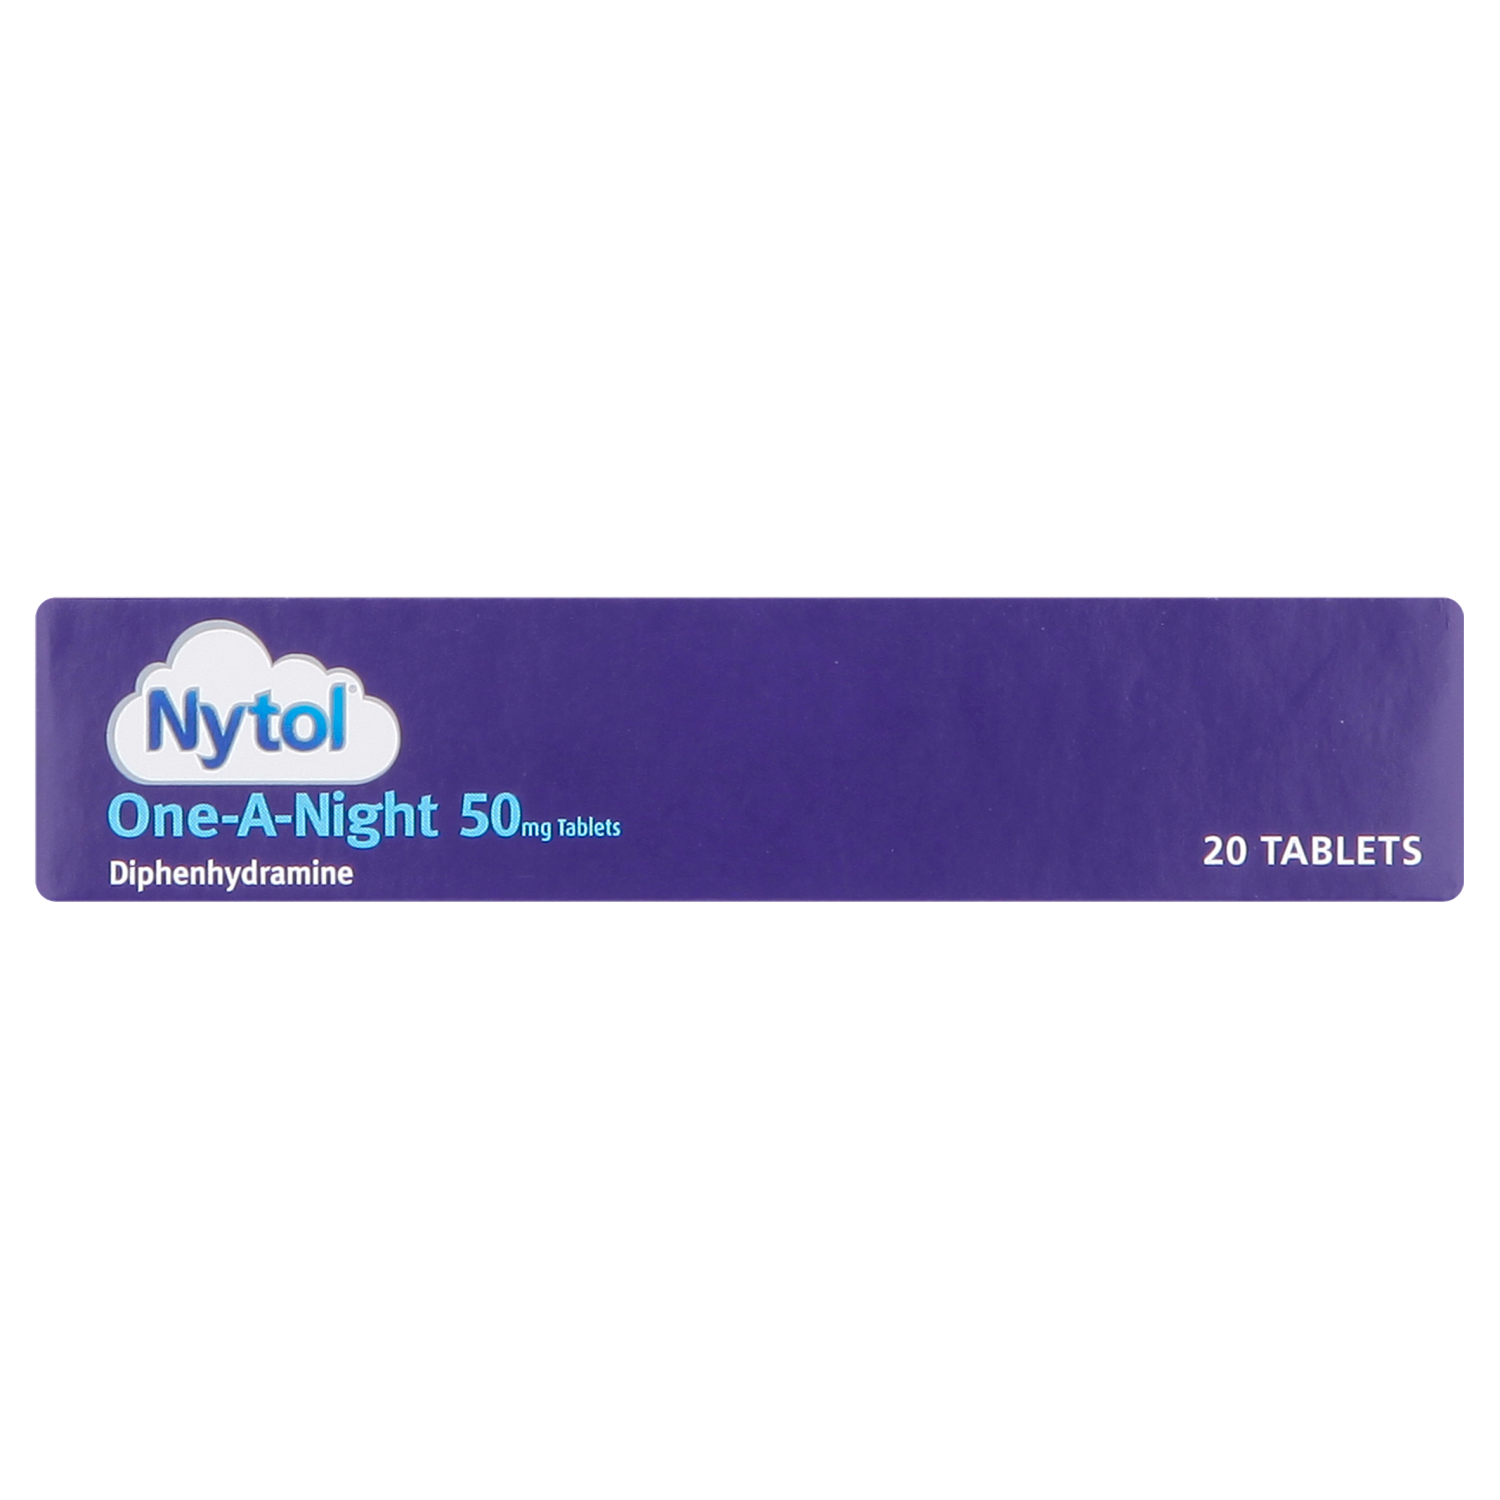 Nytol One-A-Night 50mg Tablets (20 Tablets)